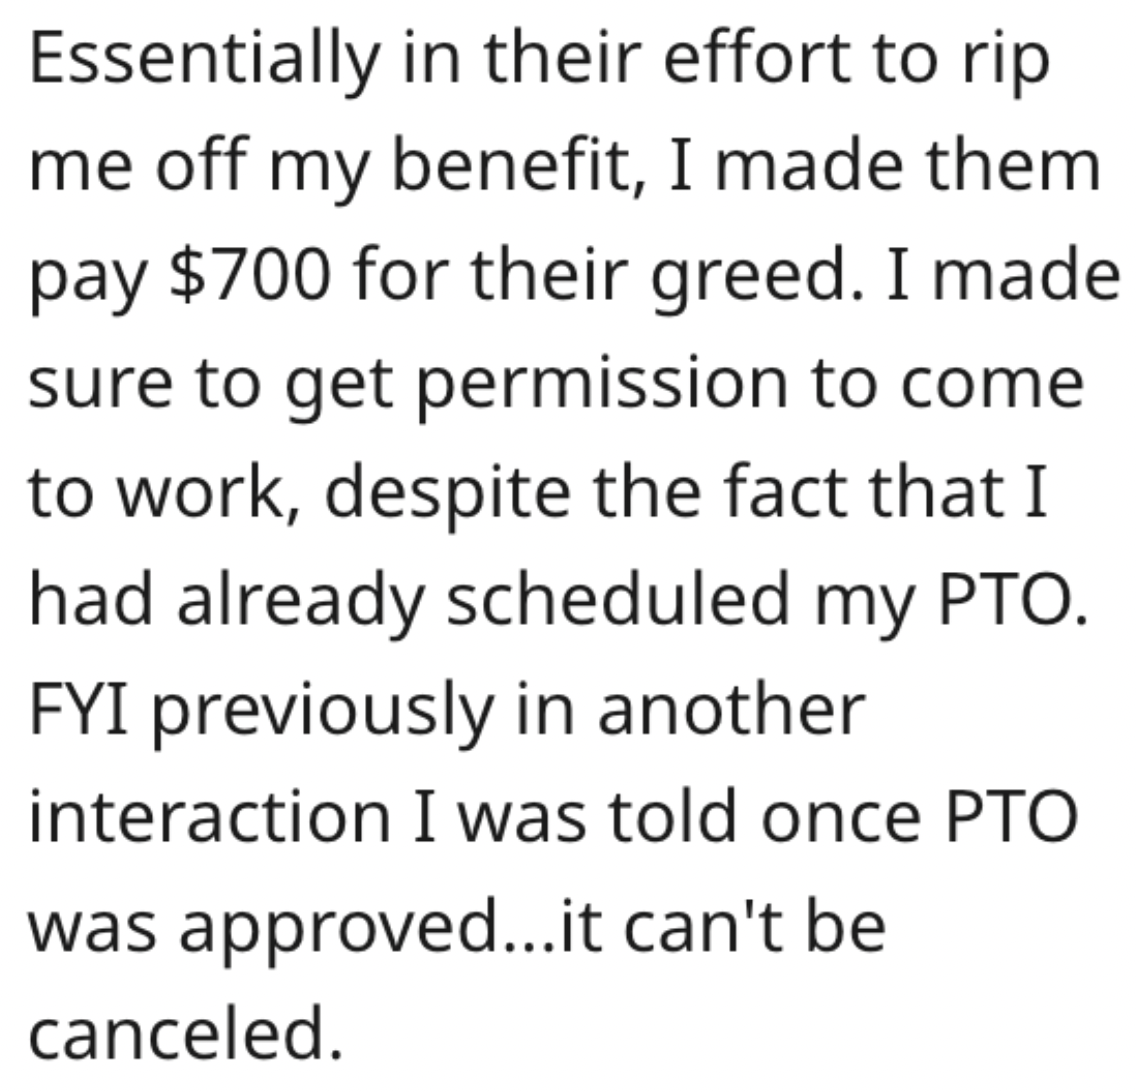 sports commentary examples - Essentially in their effort to rip me off my benefit, I made them pay $700 for their greed. I made sure to get permission to come to work, despite the fact that I had already scheduled my Pto. Fyi previously in another interac